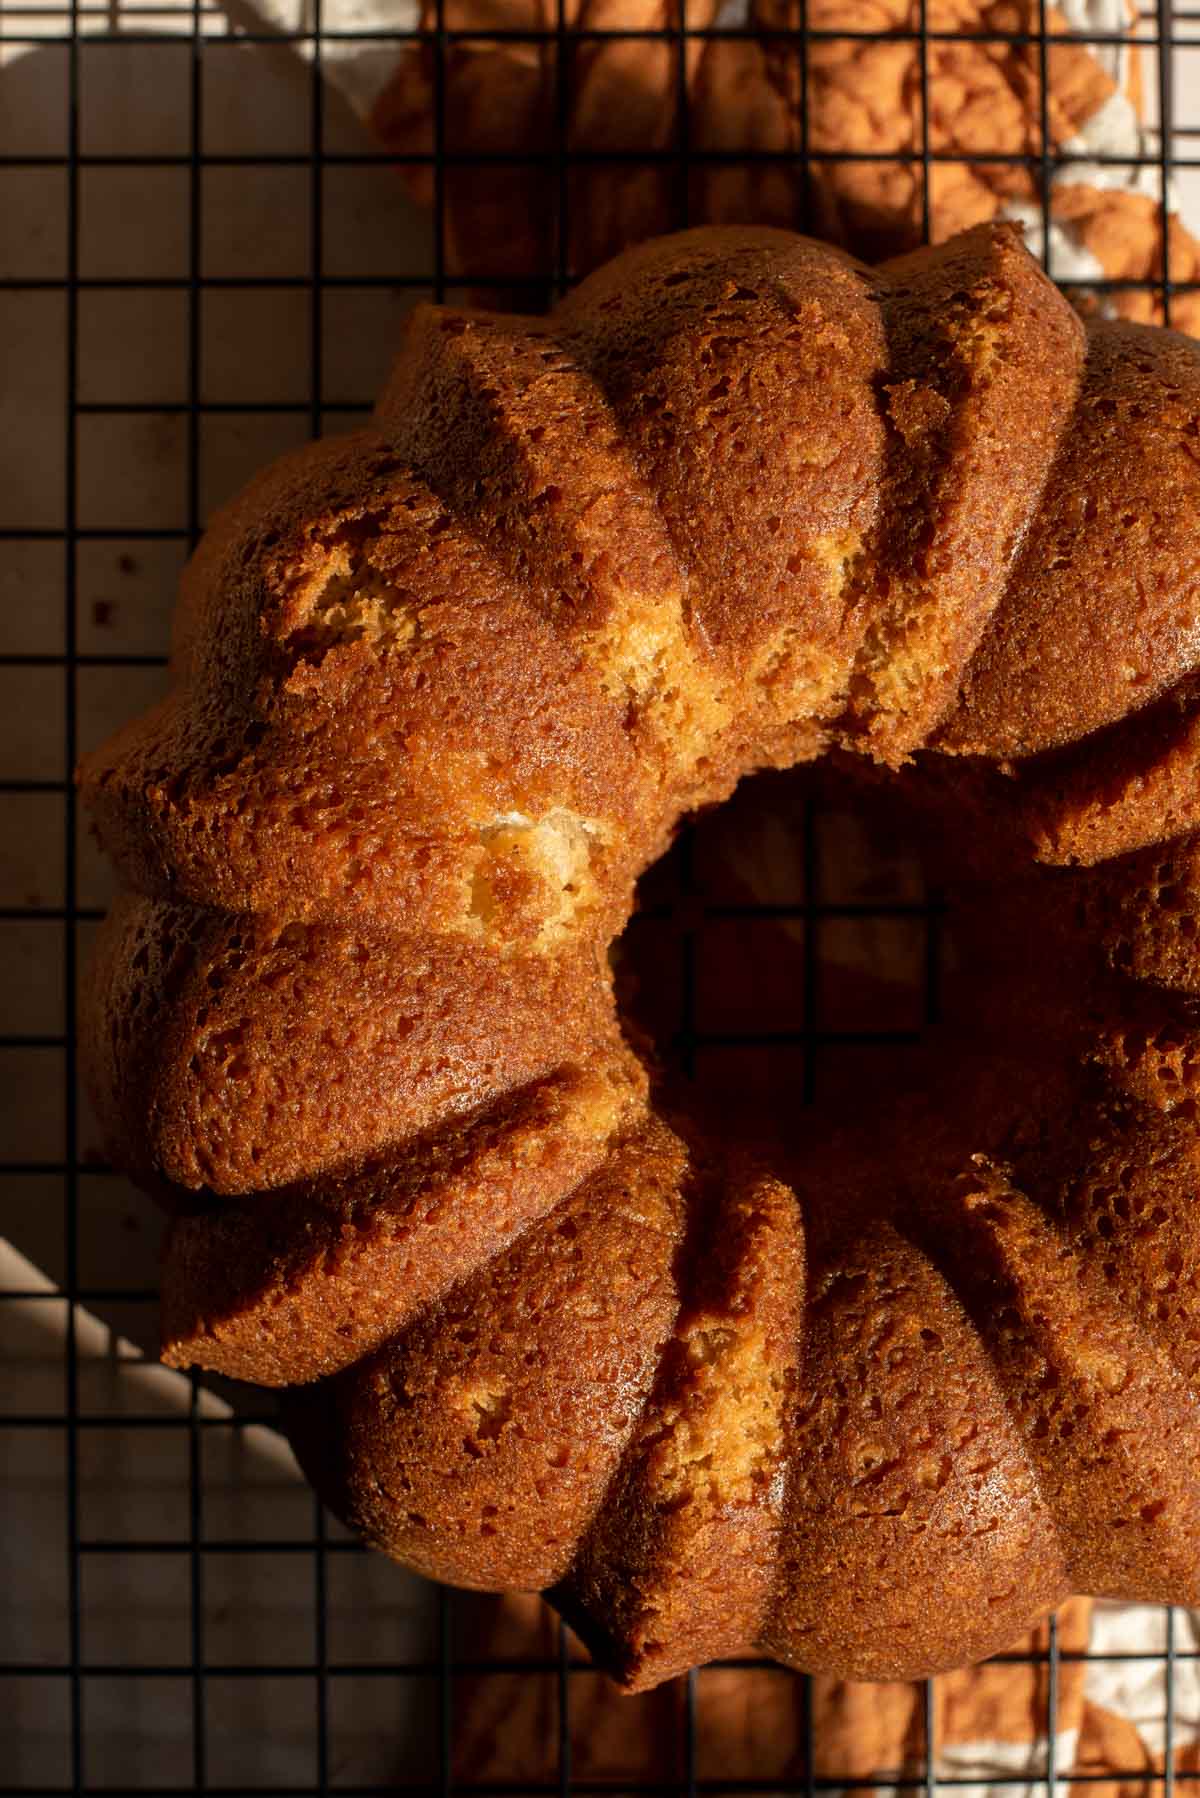 The baked bunt cake cooling on a rack.